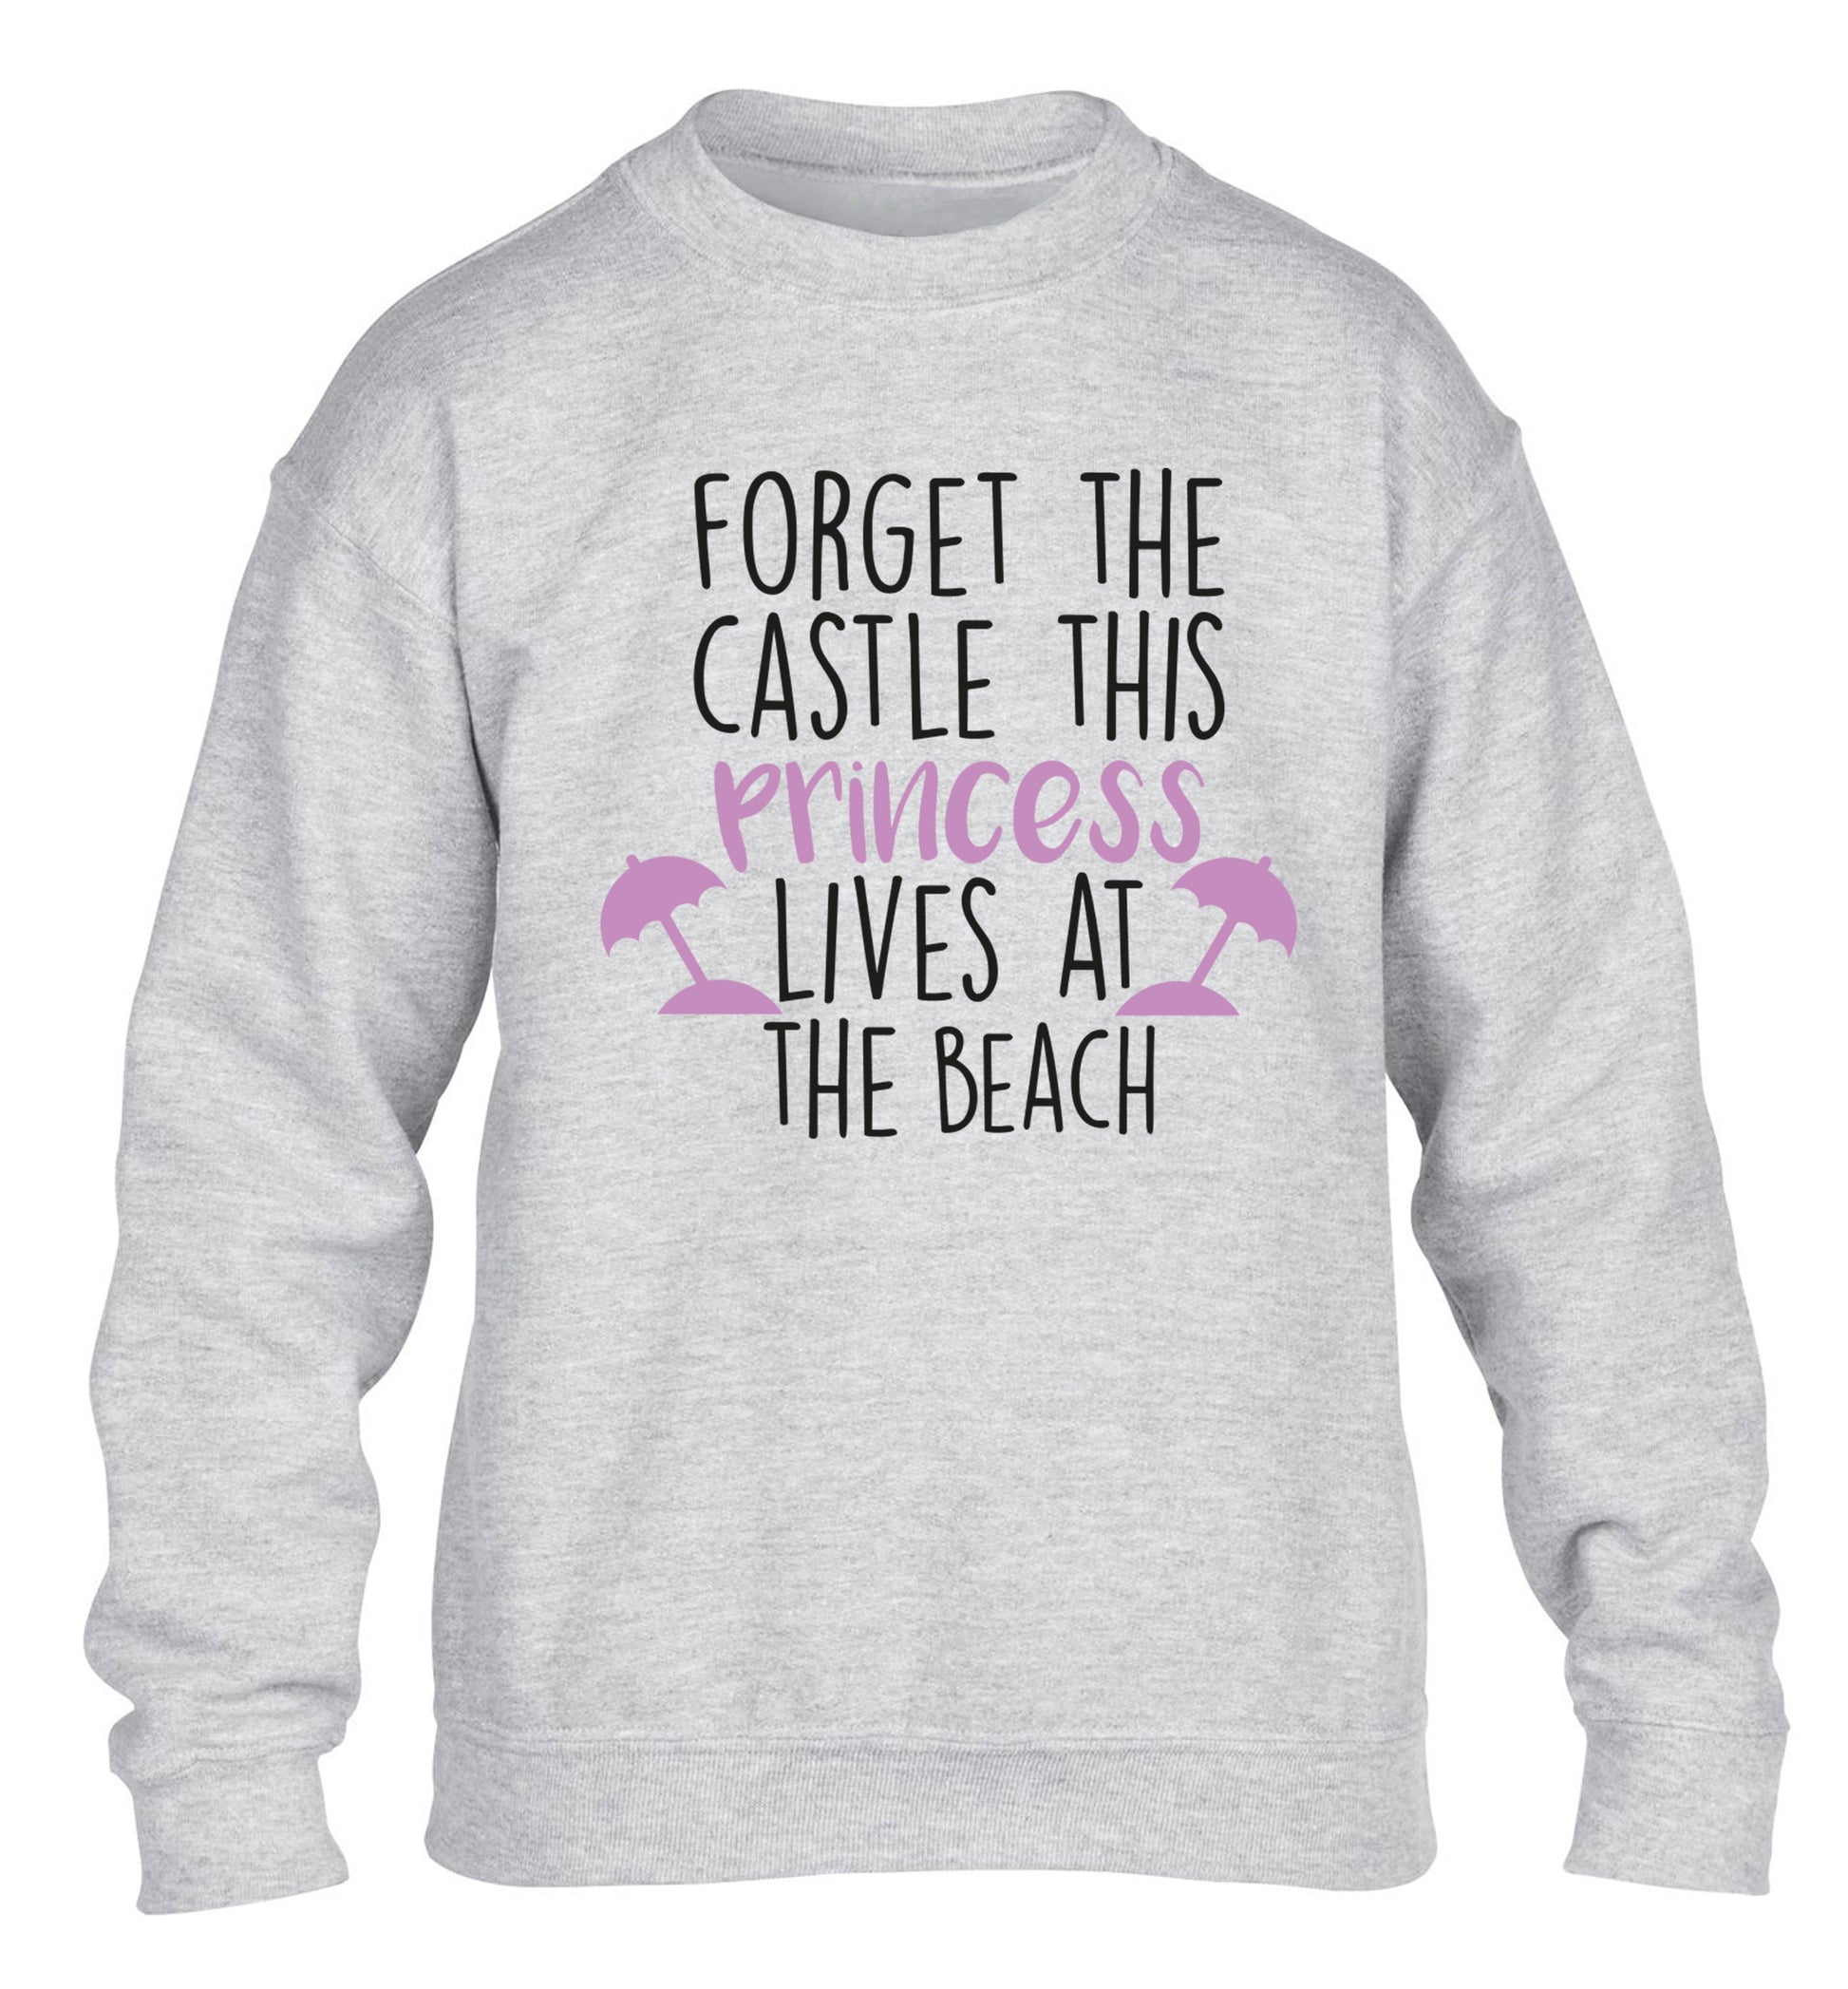 Forget the castle this princess lives at the beach children's grey sweater 12-14 Years